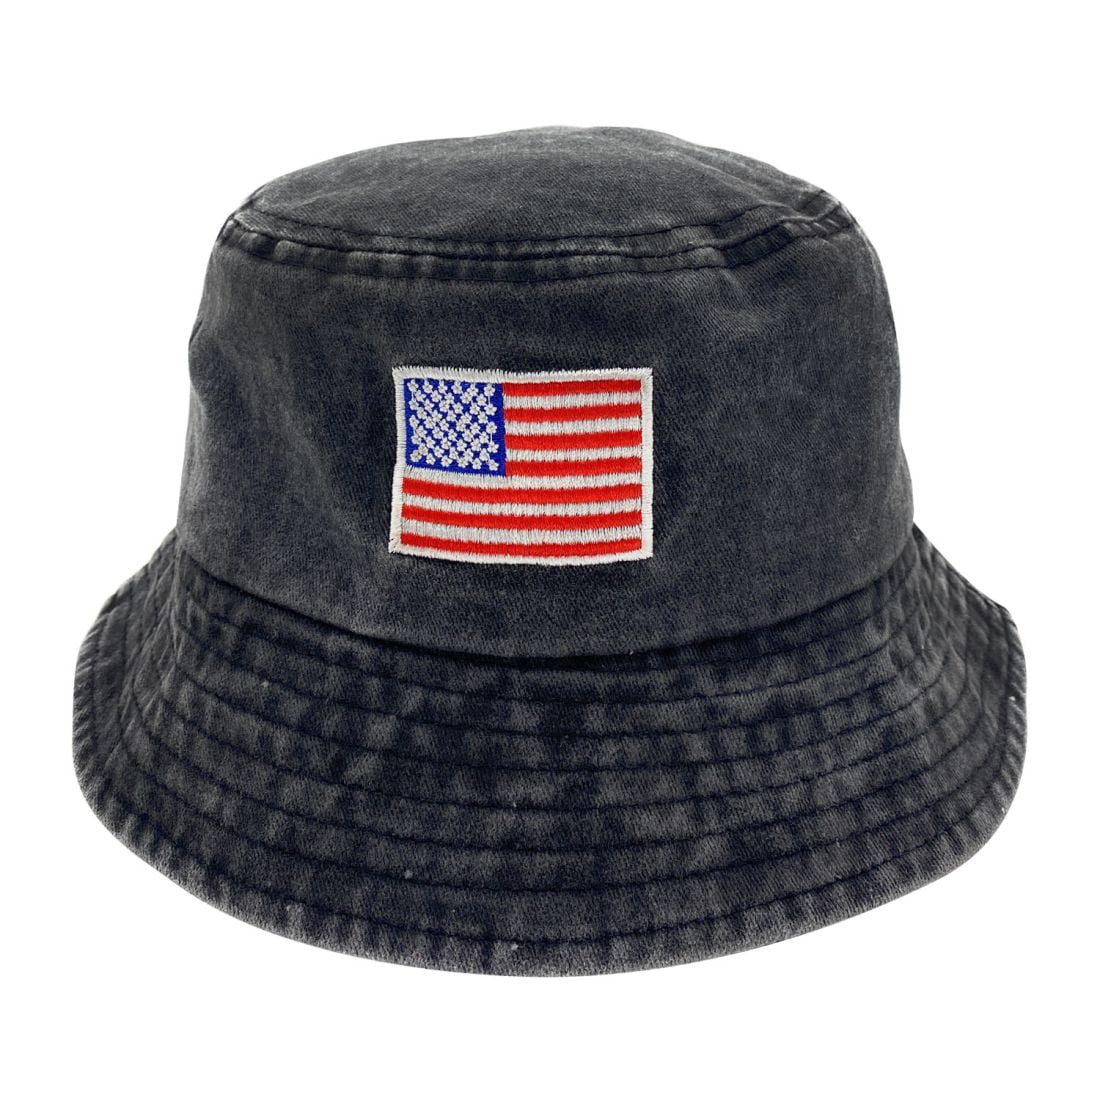 Empire Cove Washed USA Flag Cotton Bucket Hats Patriotic Hats Fisherman ...